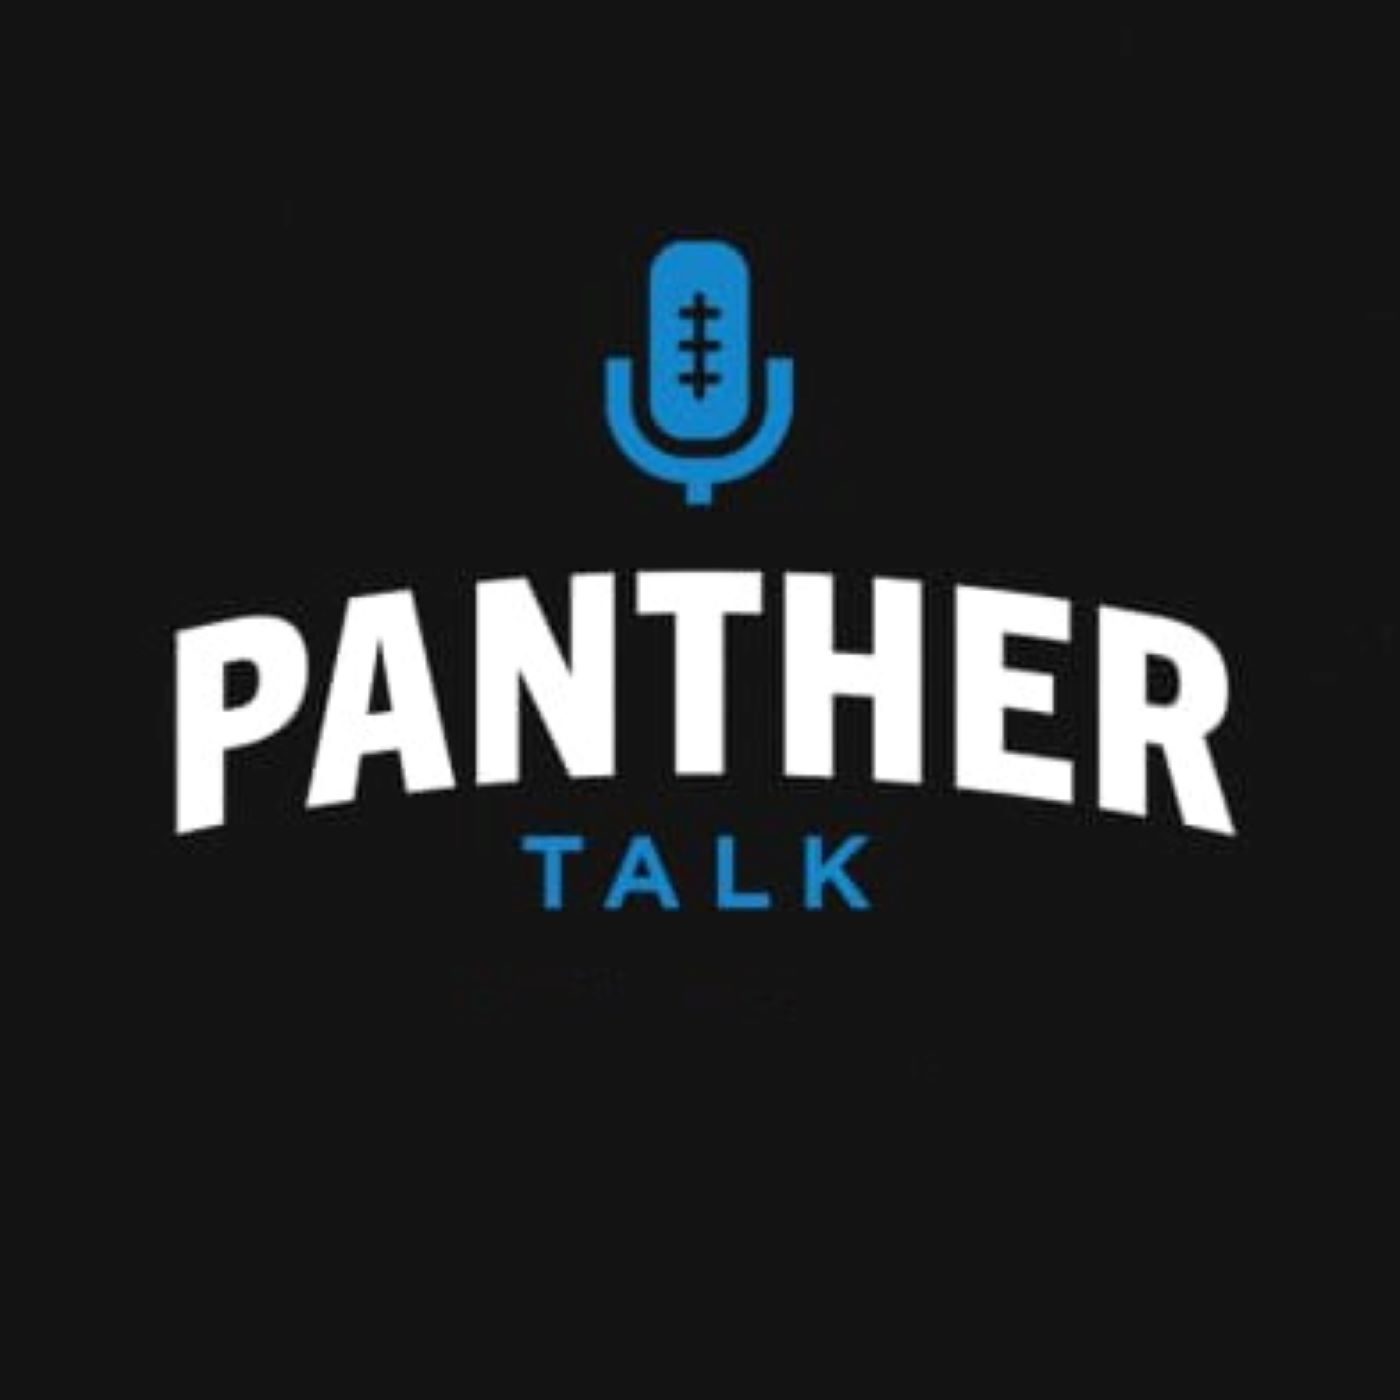 Panther Talk (January 8th)